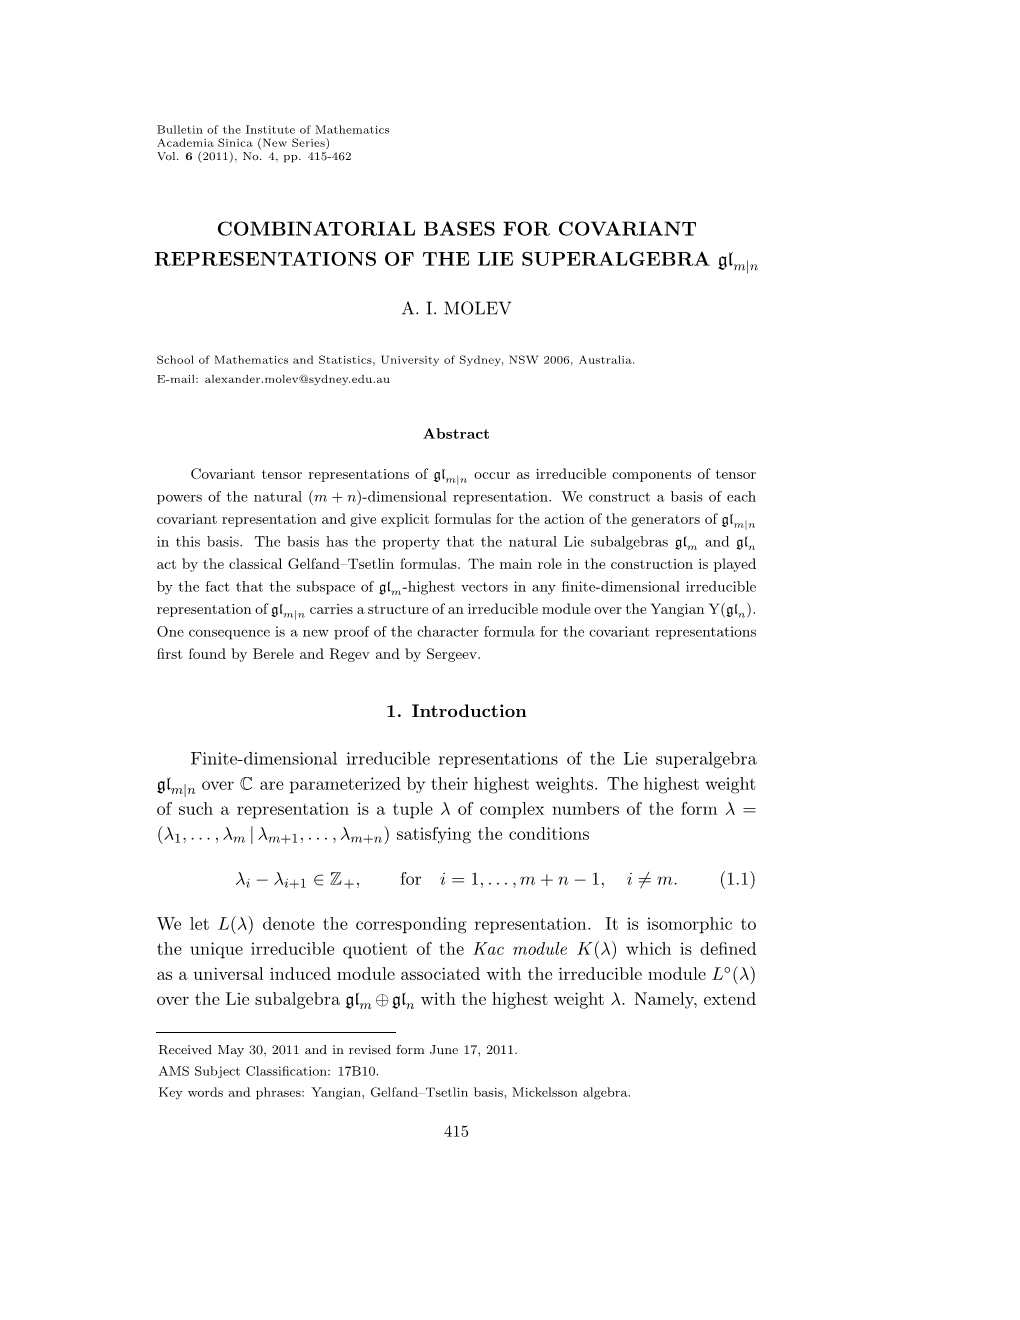 COMBINATORIAL BASES for COVARIANT REPRESENTATIONS of the LIE SUPERALGEBRA Glm|N